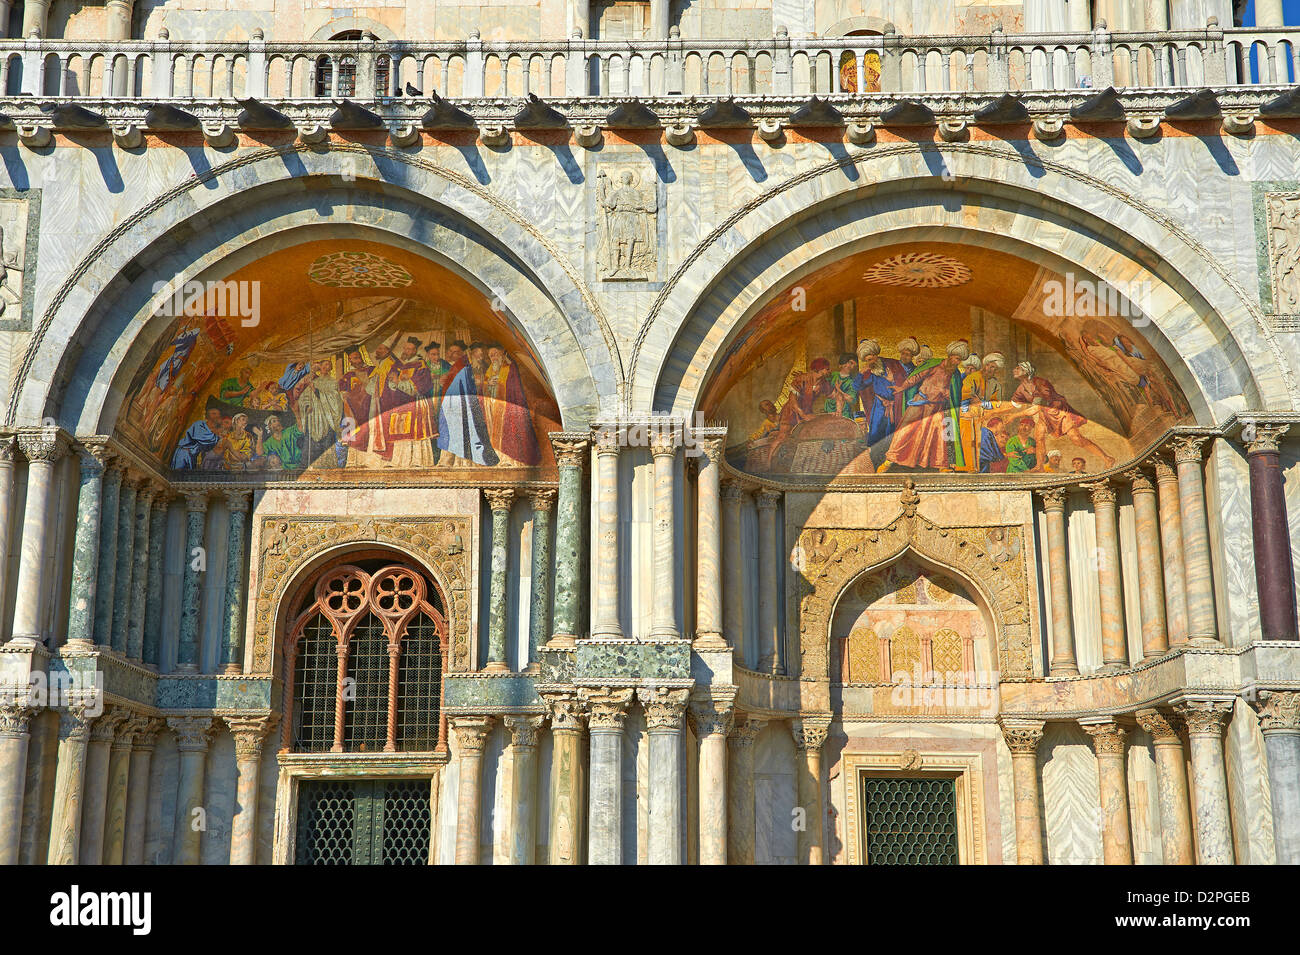 Facade with details of the Romanesque pillars & mosaics of St Mark's Basilica, Venice Stock Photo